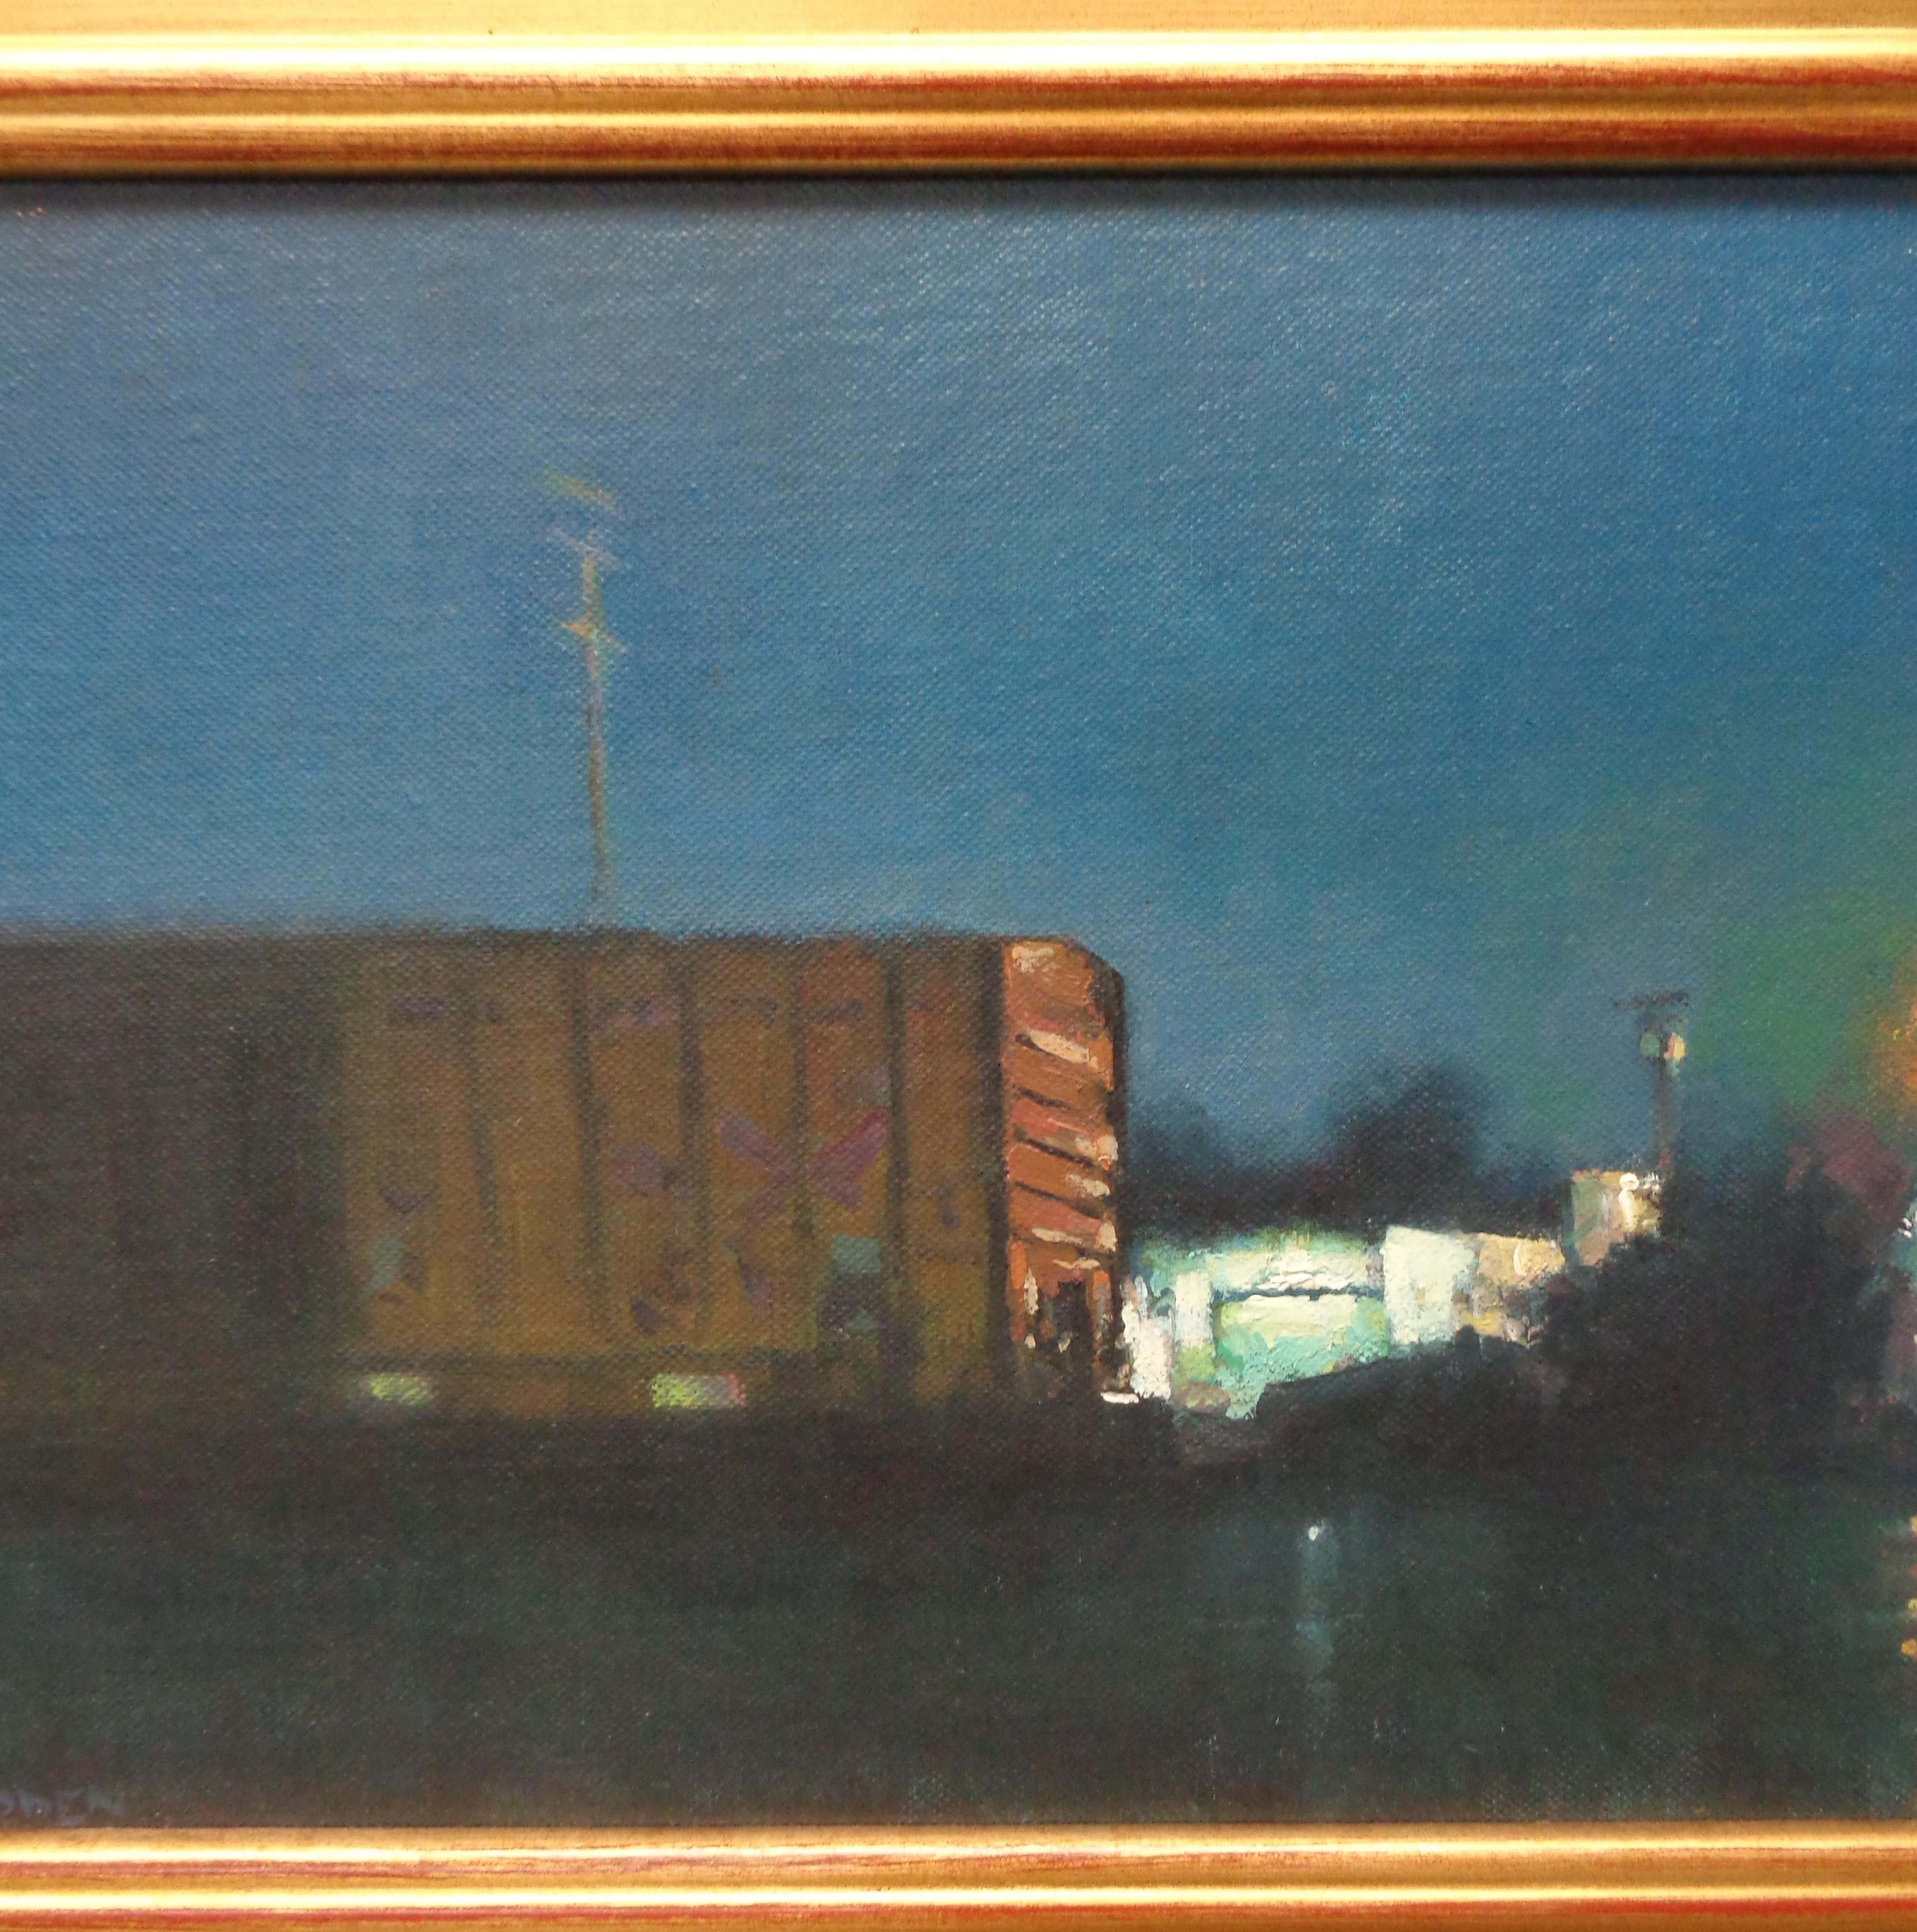  Impressionistic Train Night Landscape Painting Michael Budden Evening Boxcar 2